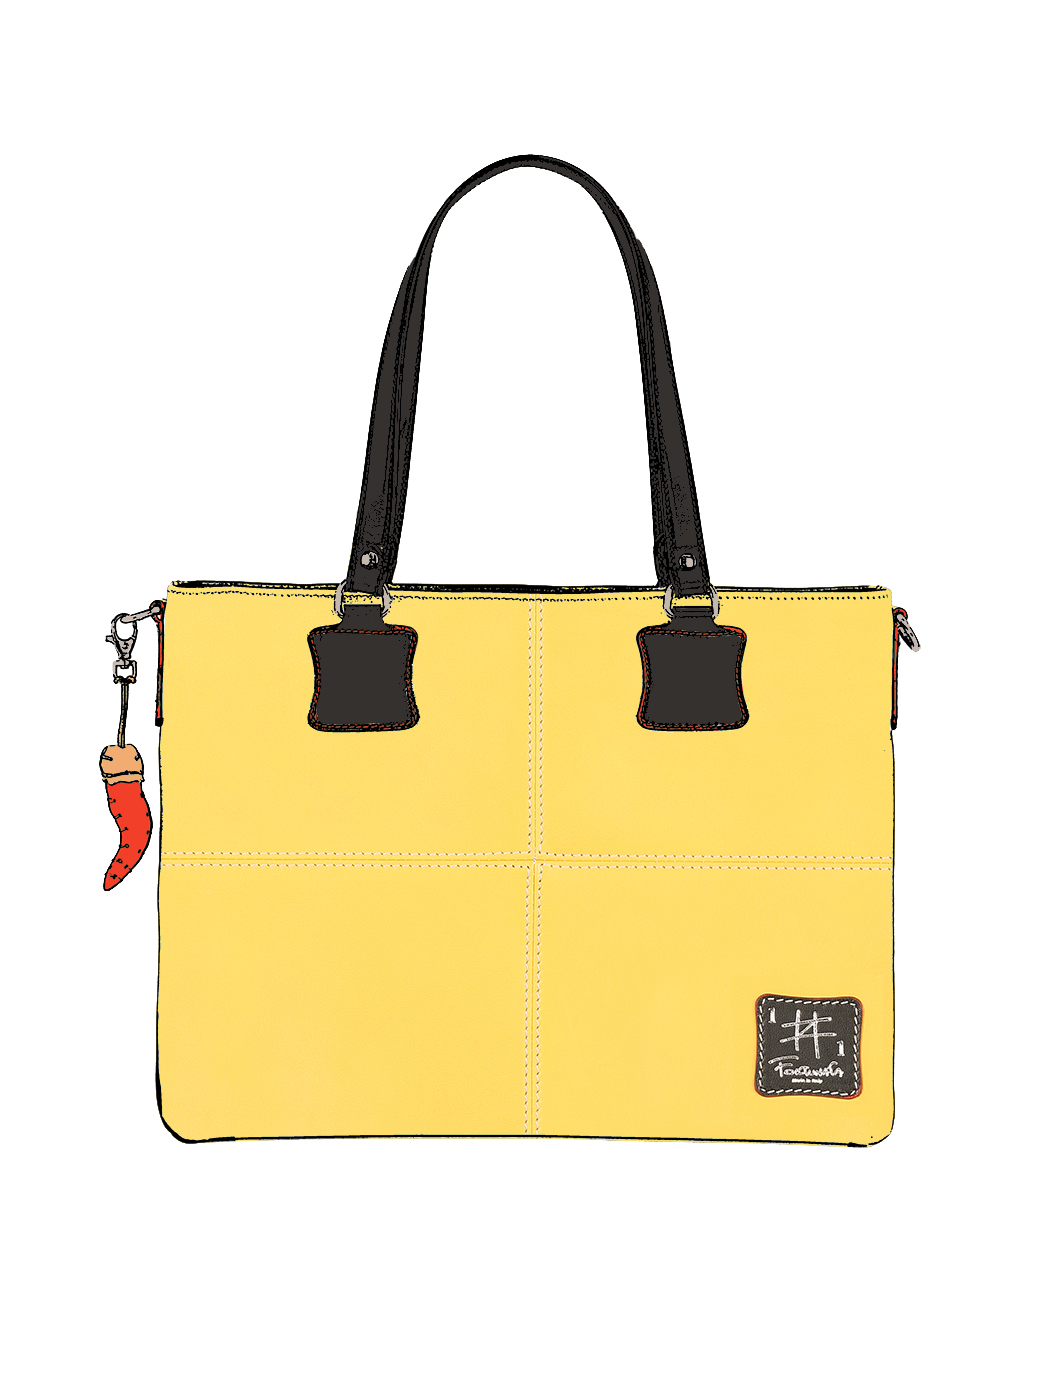 Shoulder Tote Bag Leather Yellow - Handmade in Italy